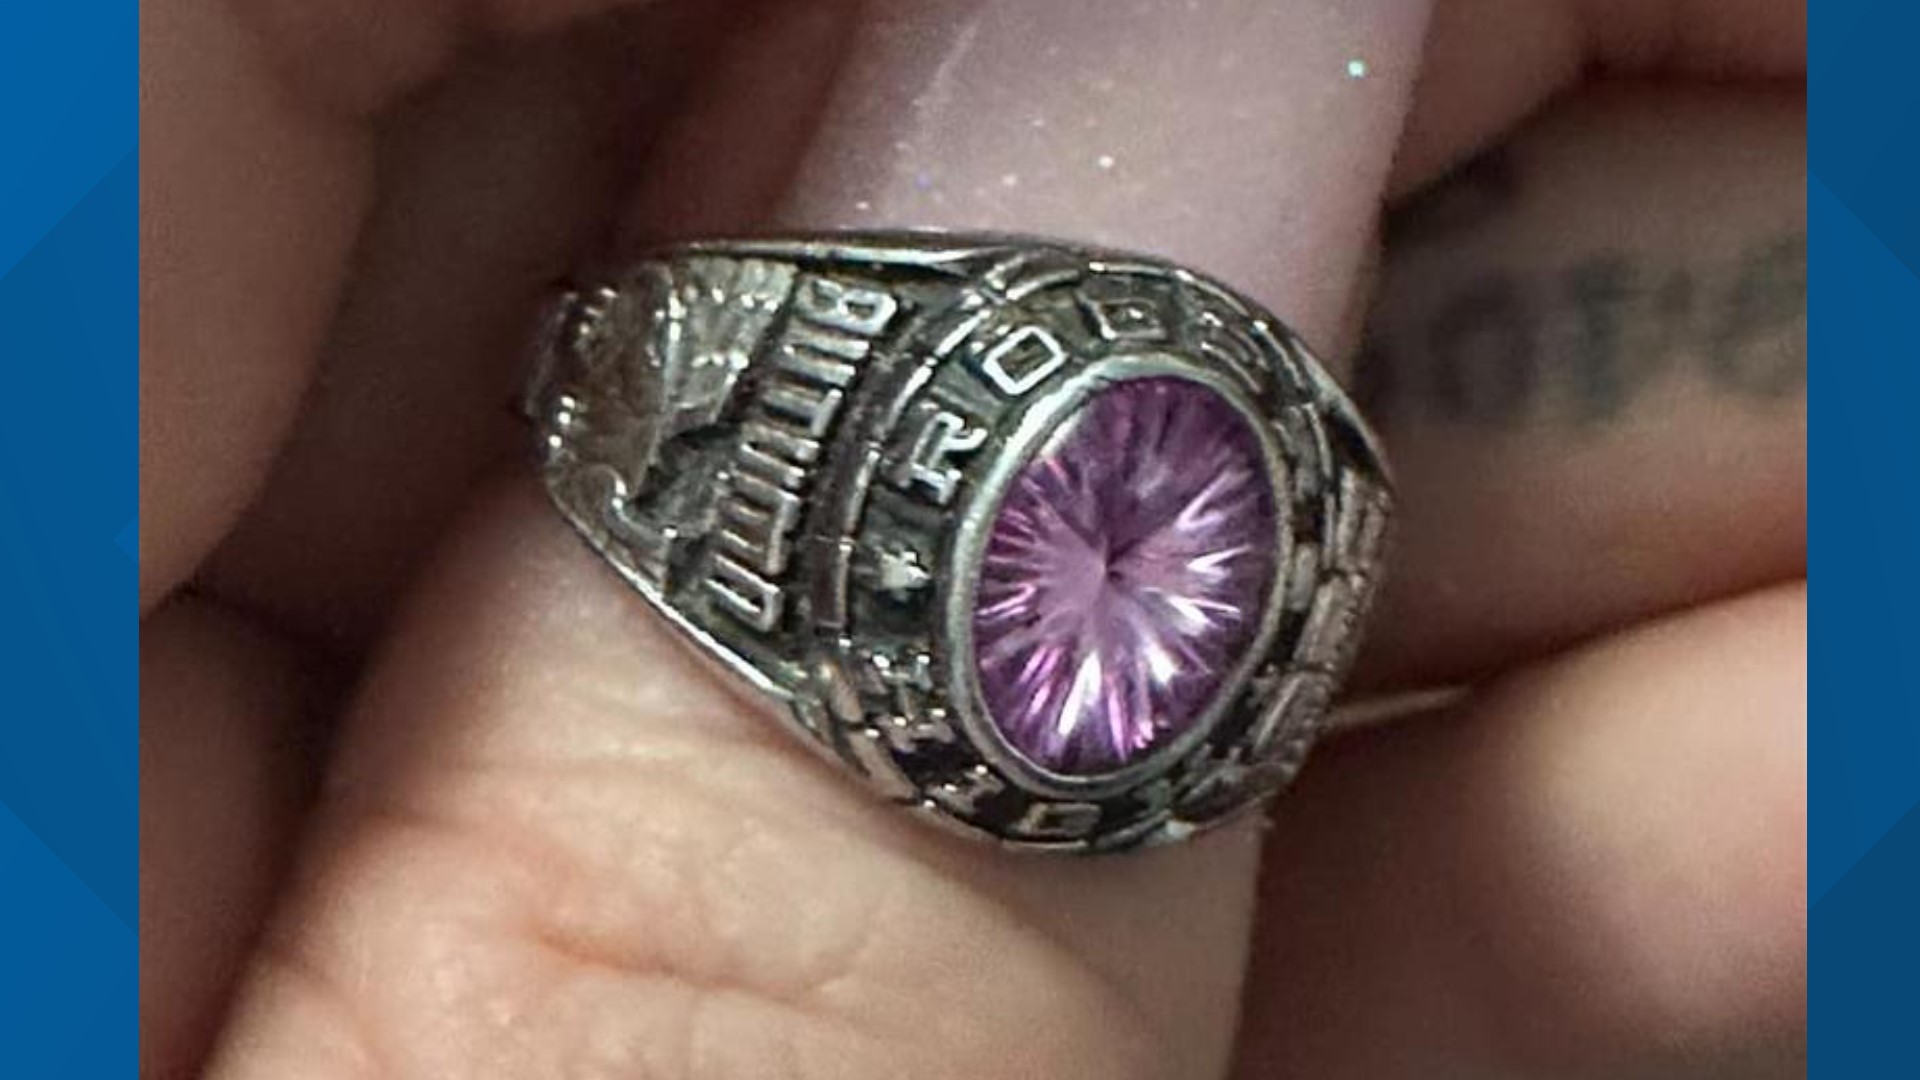 Autumn Entrop was stabbed to death by her husband in 2013. After missing for over 20 years, the ring is back home with Entrop's twin sister.